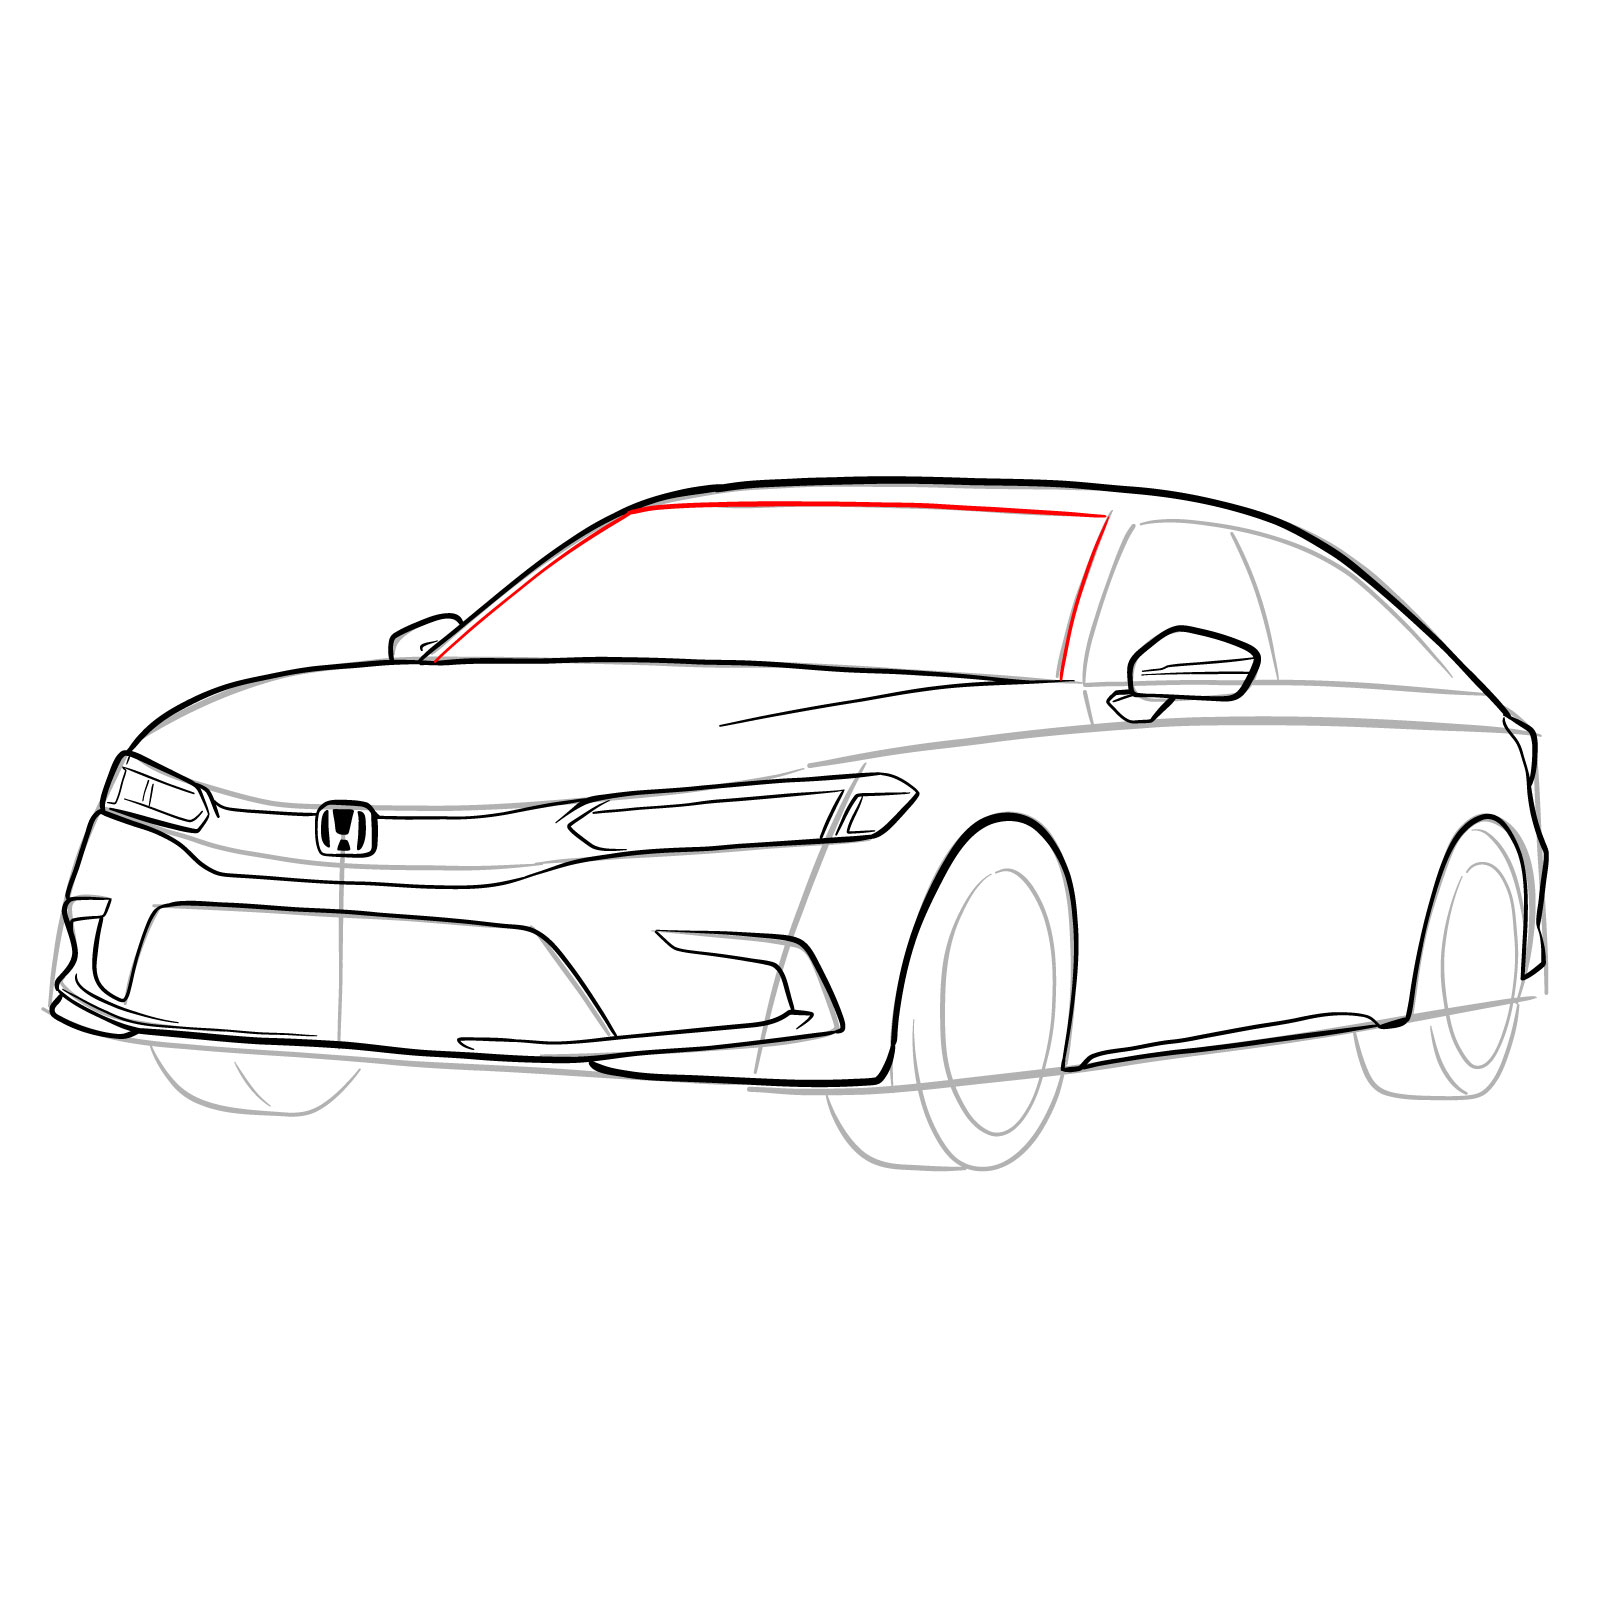 How to draw a 2022 Honda Civic - step 19